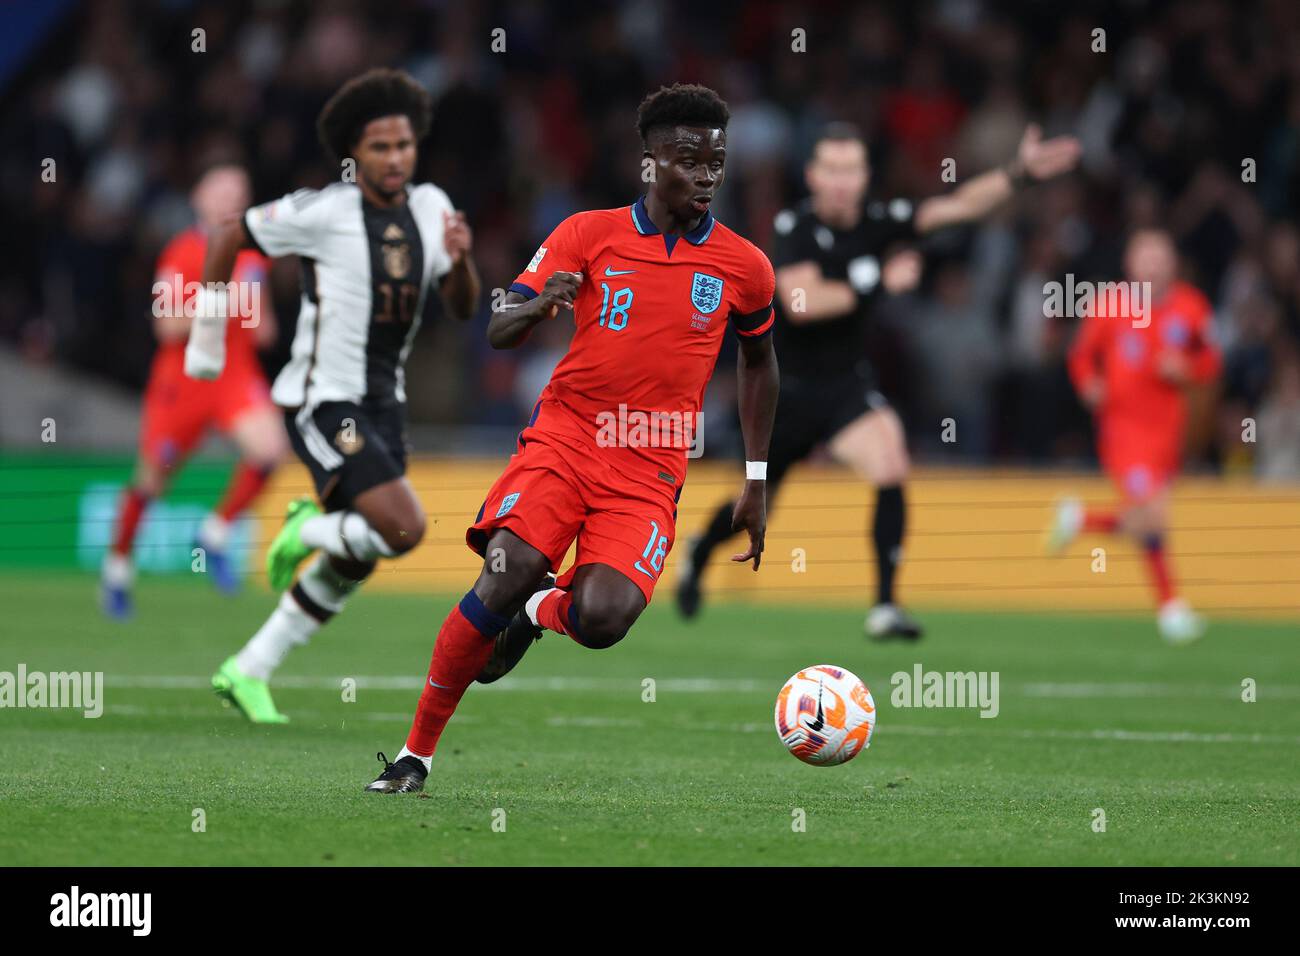 London, UK. 26th Sep, 2022. Bukayo Saka of England in action. England v Germany, UEFA Nations league International group C match at Wembley Stadium in London on Monday 26th September 2022. Editorial use only. pic by Andrew Orchard/Andrew Orchard sports photography/Alamy Live News Credit: Andrew Orchard sports photography/Alamy Live News Stock Photo